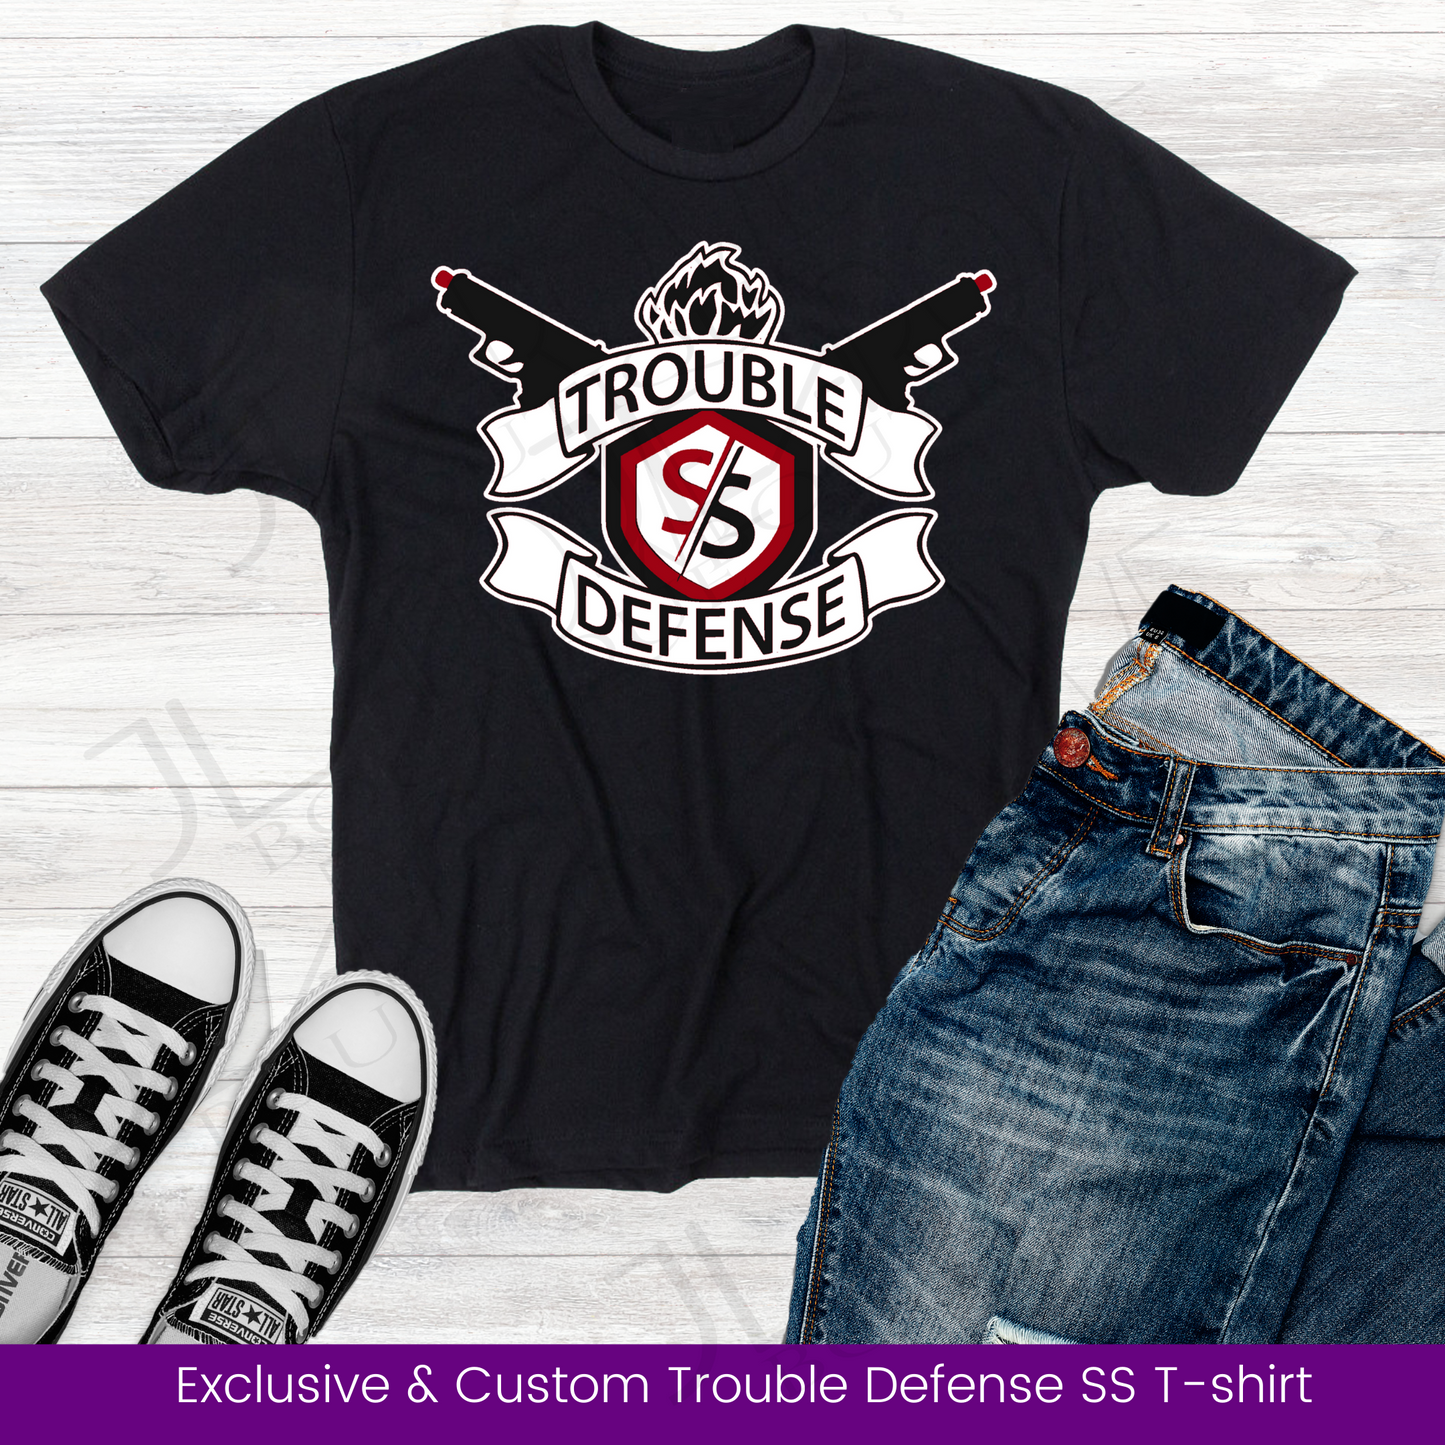 Trouble Defense SS T-shirt